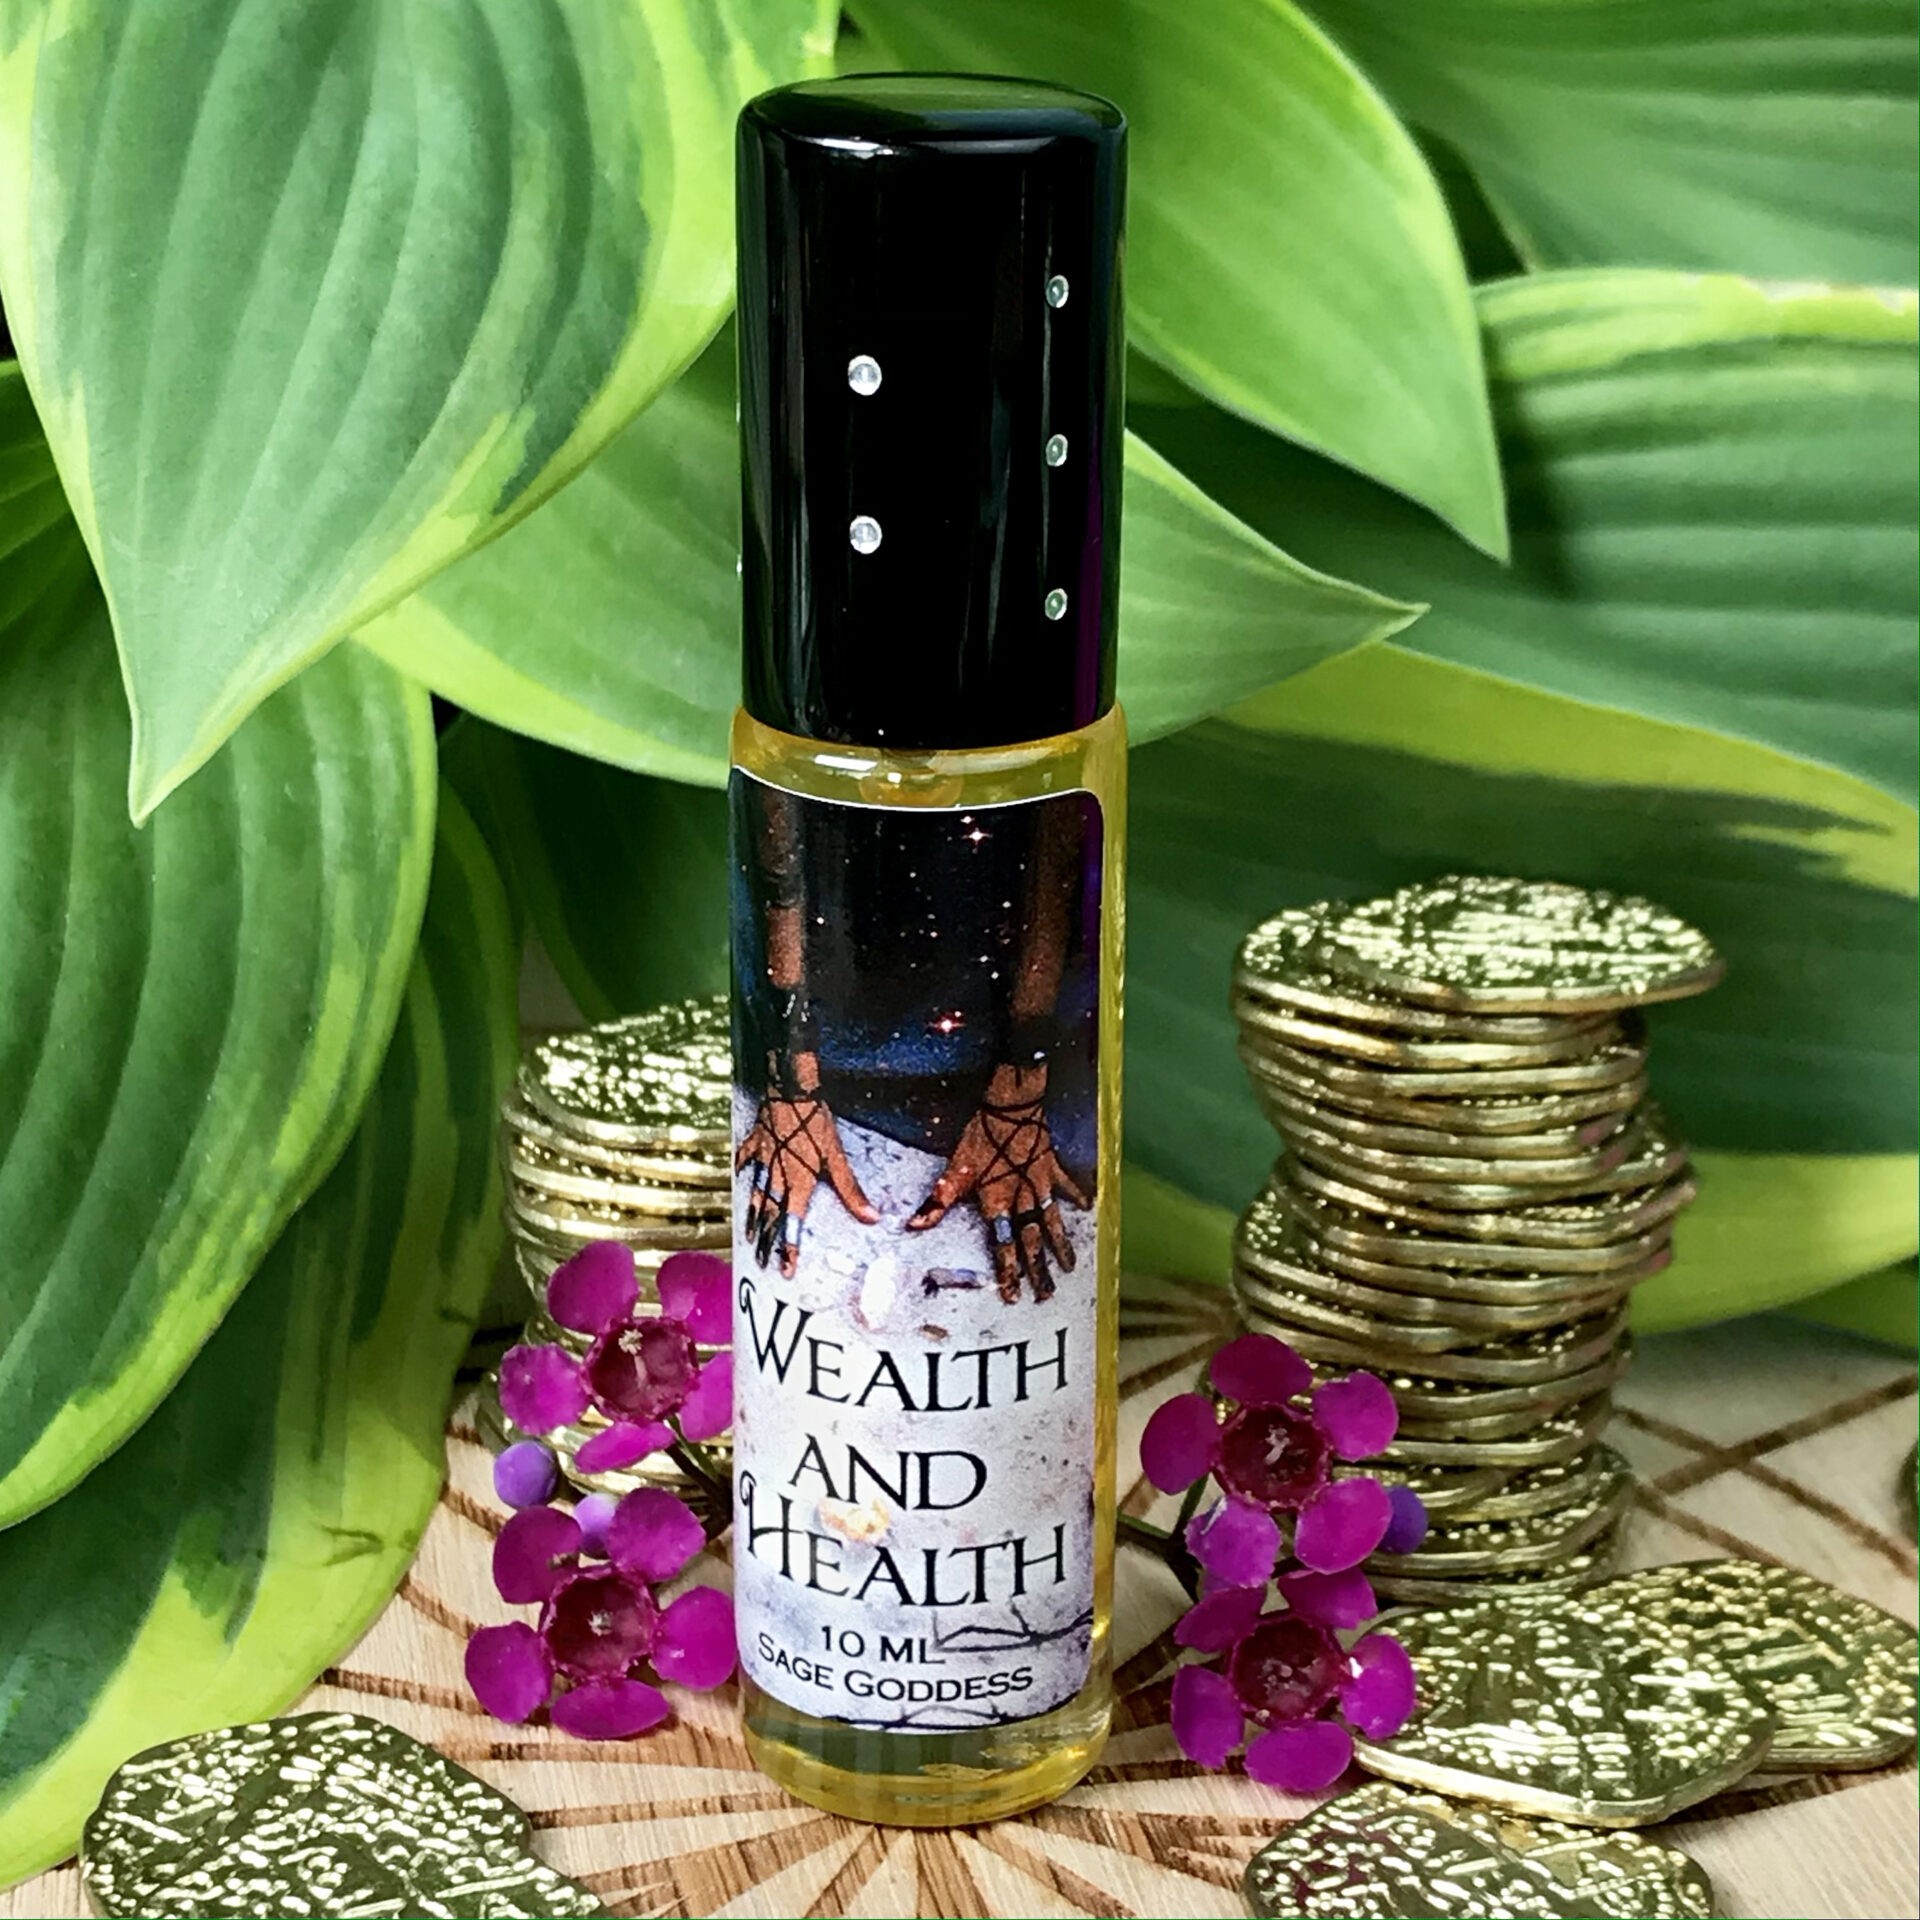 Patchouli Essential Oil at the Dreaming Goddess